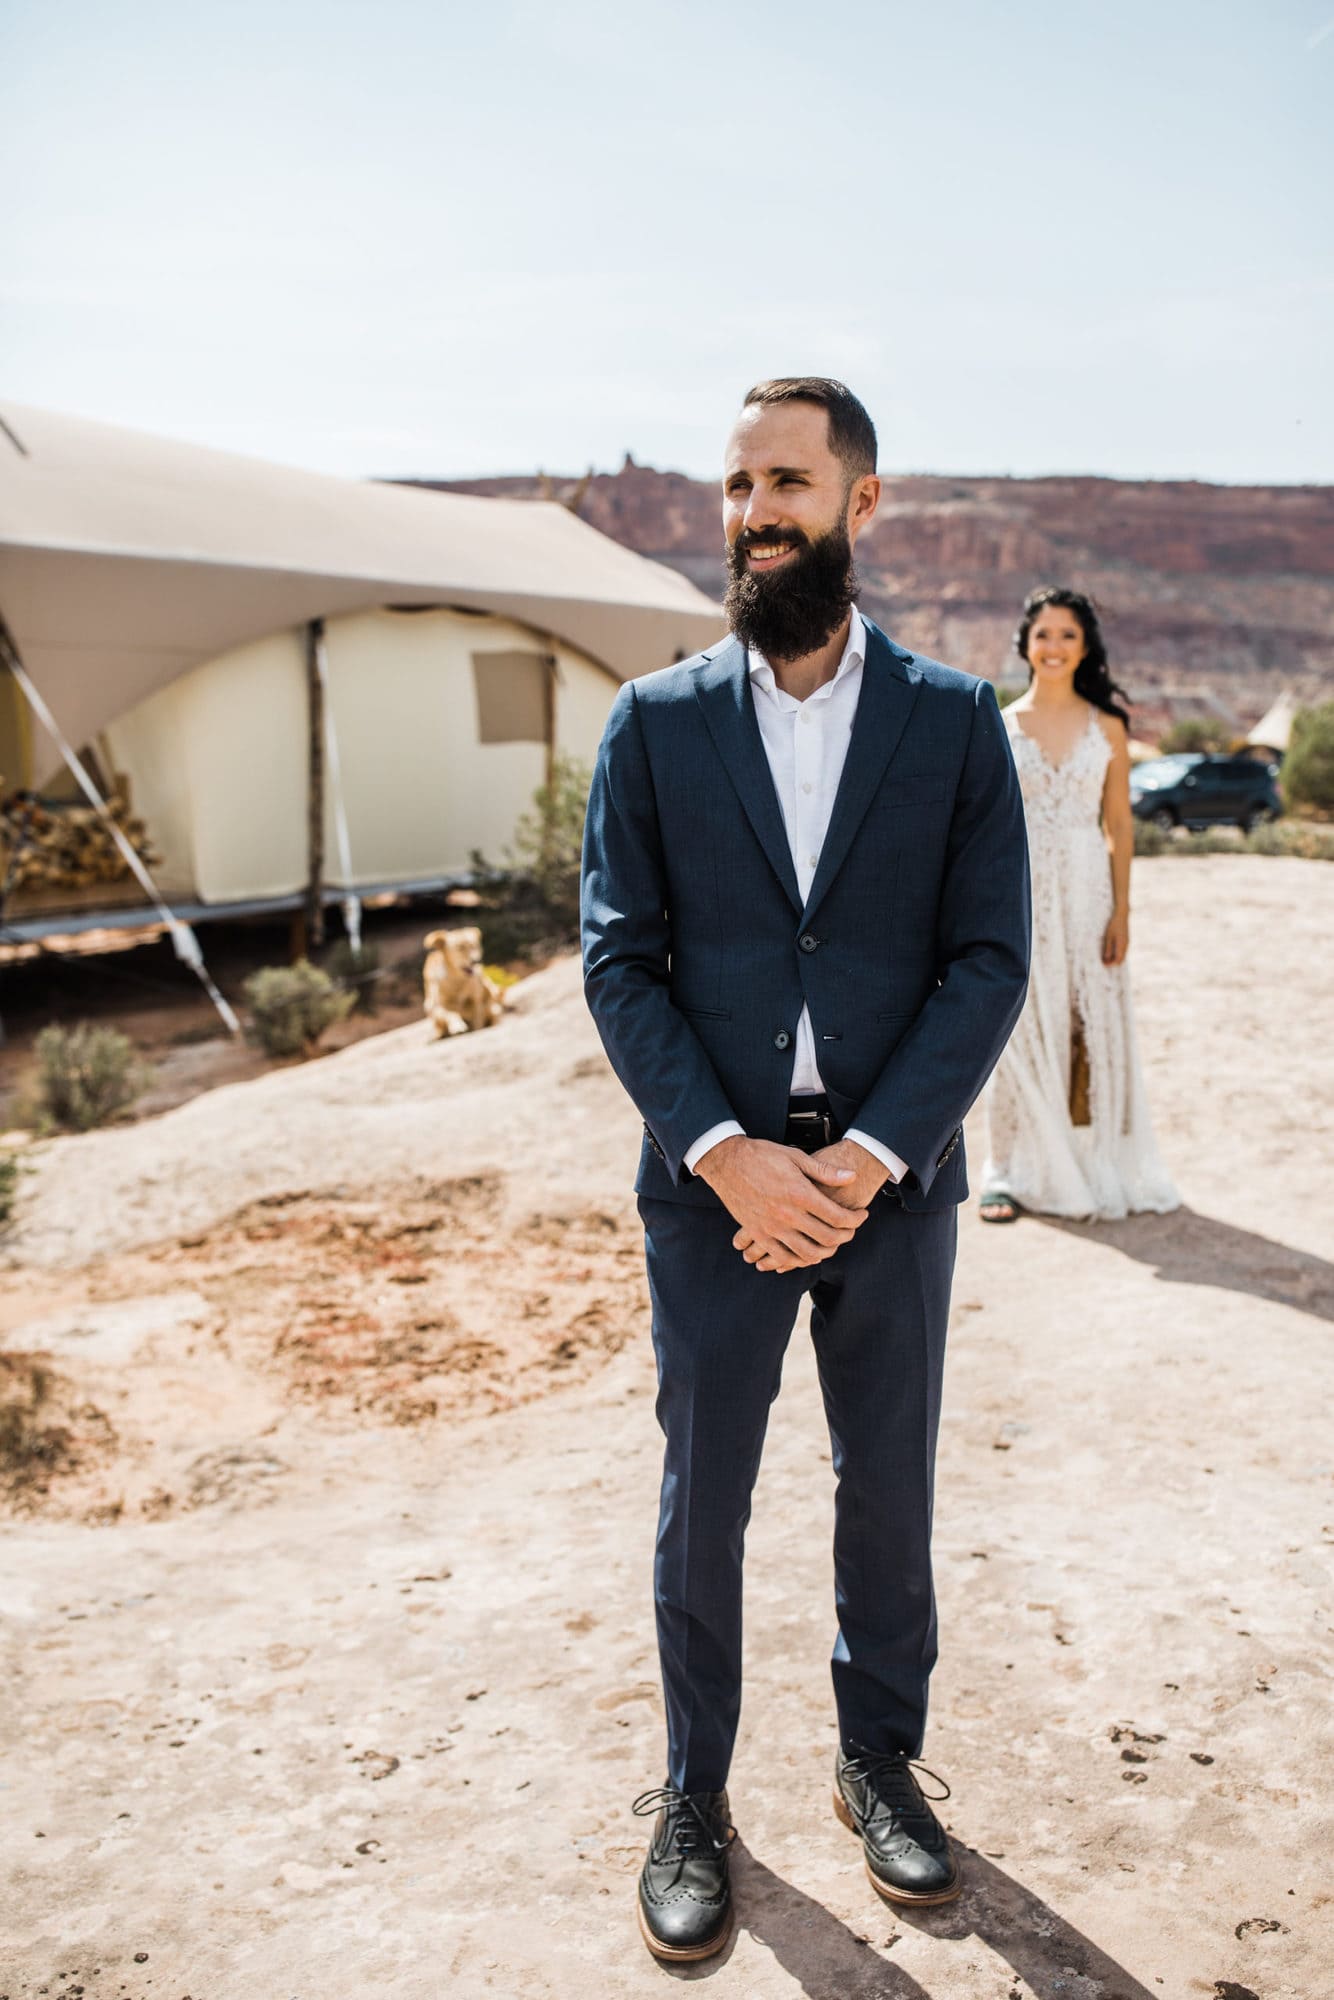 Talk about EPIC. This three day hiking elopement is the perfect balance of including family and not giving up adventure. This one isn't to be missed!